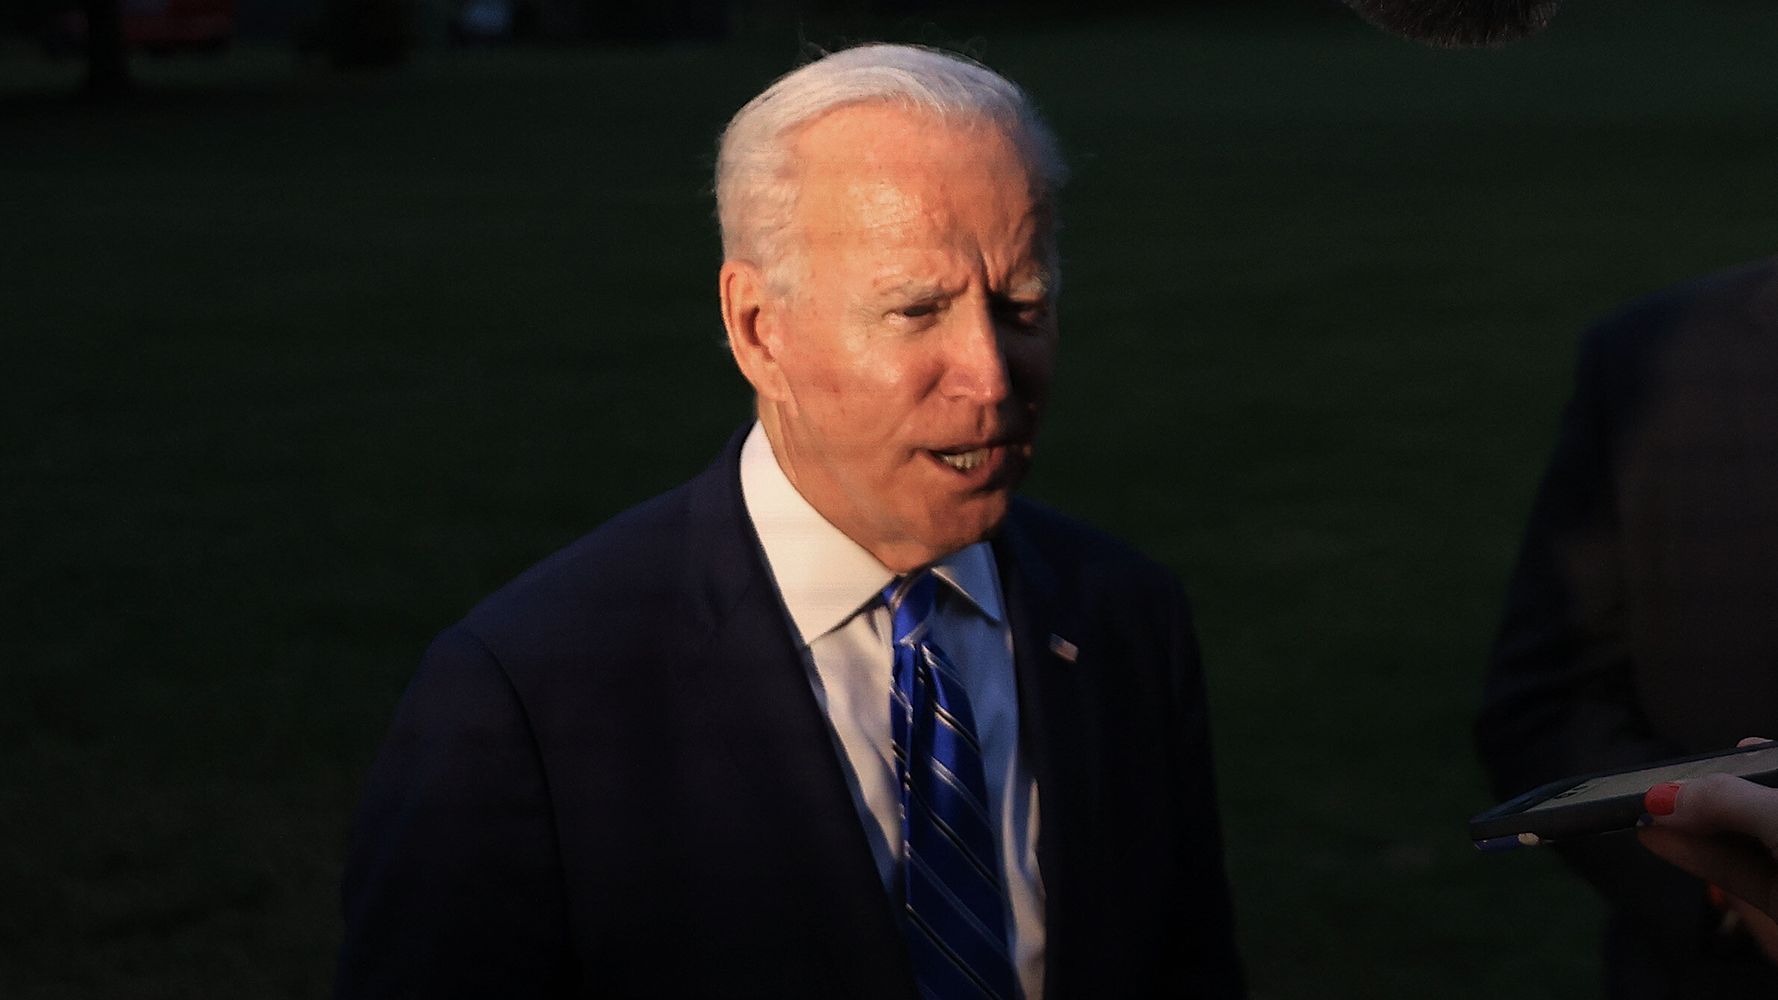 Biden Says ‘Real Possibility’ Senate Democrats Change Filibuster Rules To Raise Debt Ceiling